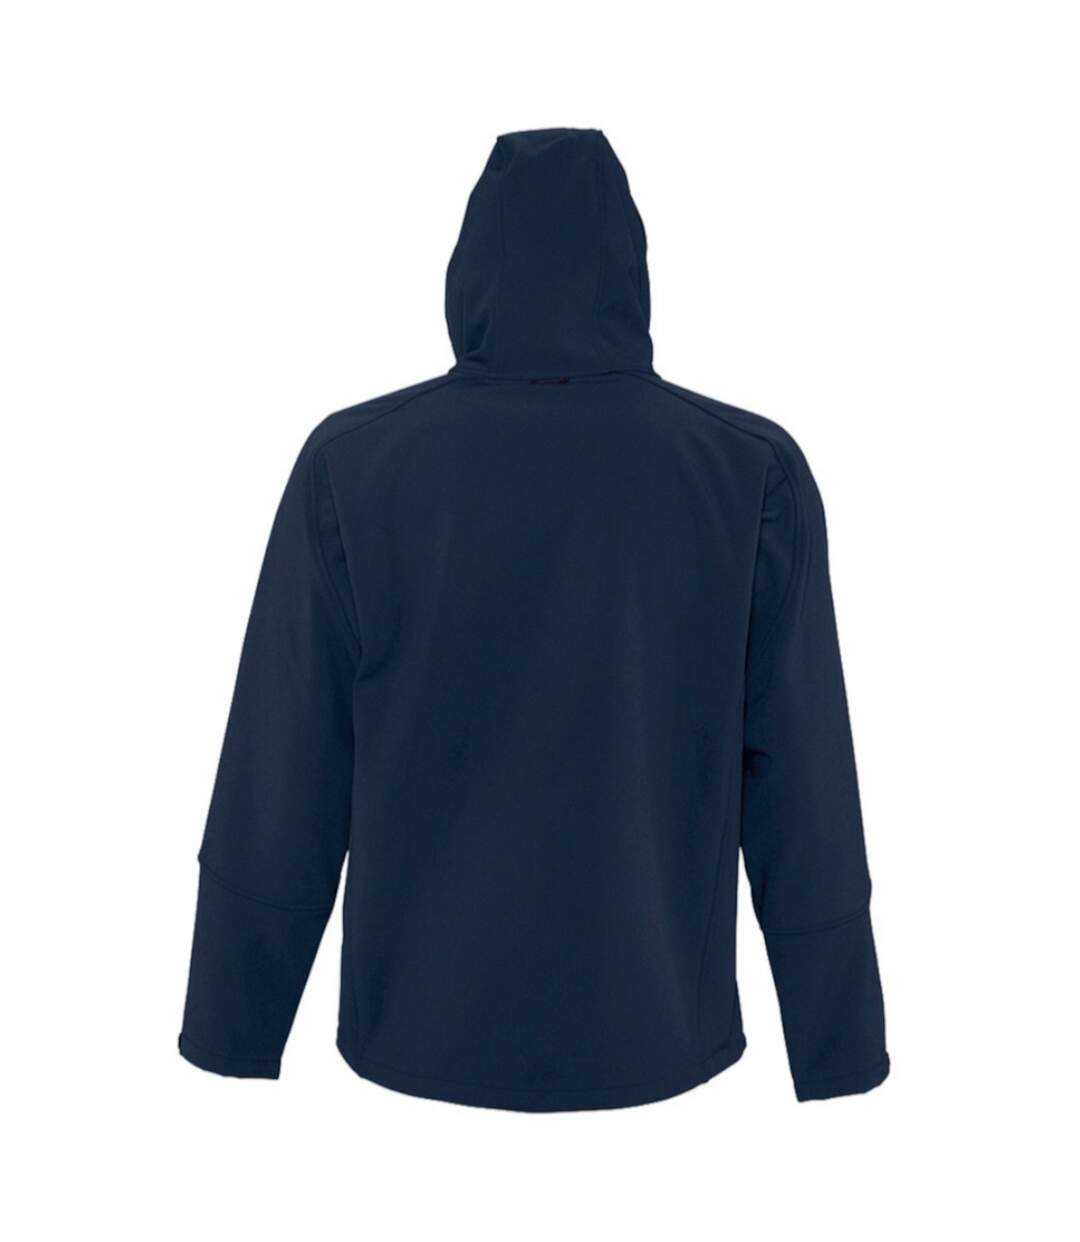 SOLS Mens Replay Hooded Soft Shell Jacket (Breathable, Windproof And Water Resistant) (French Navy) - UTPC410